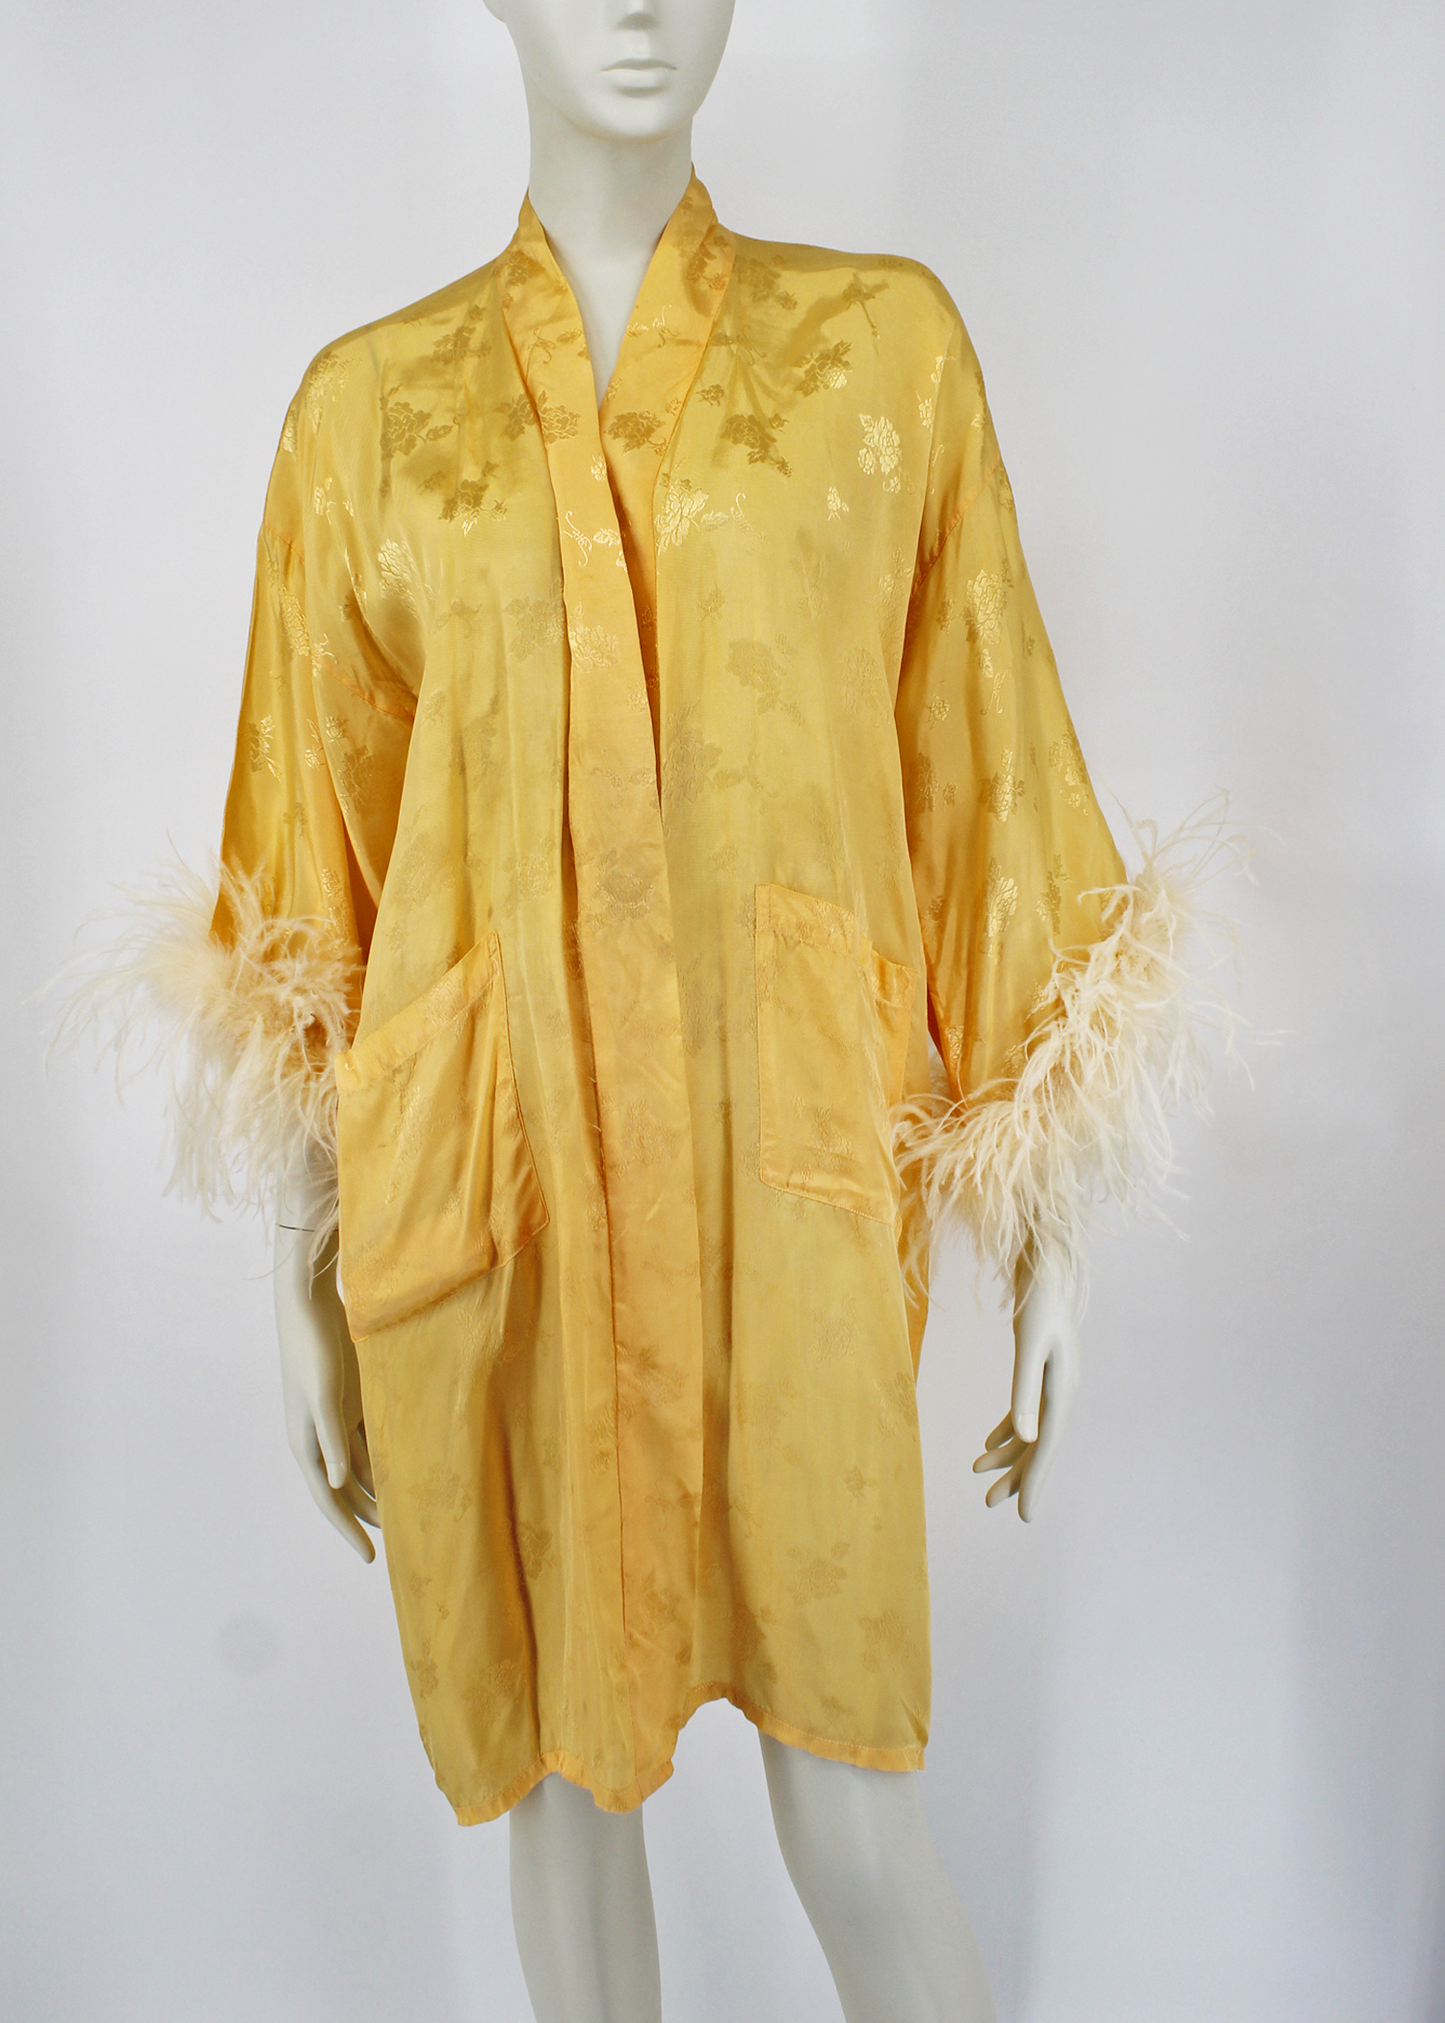 Dauphinette 1940s Yellow Dragon Hand-Embroidered Robe with Feathers